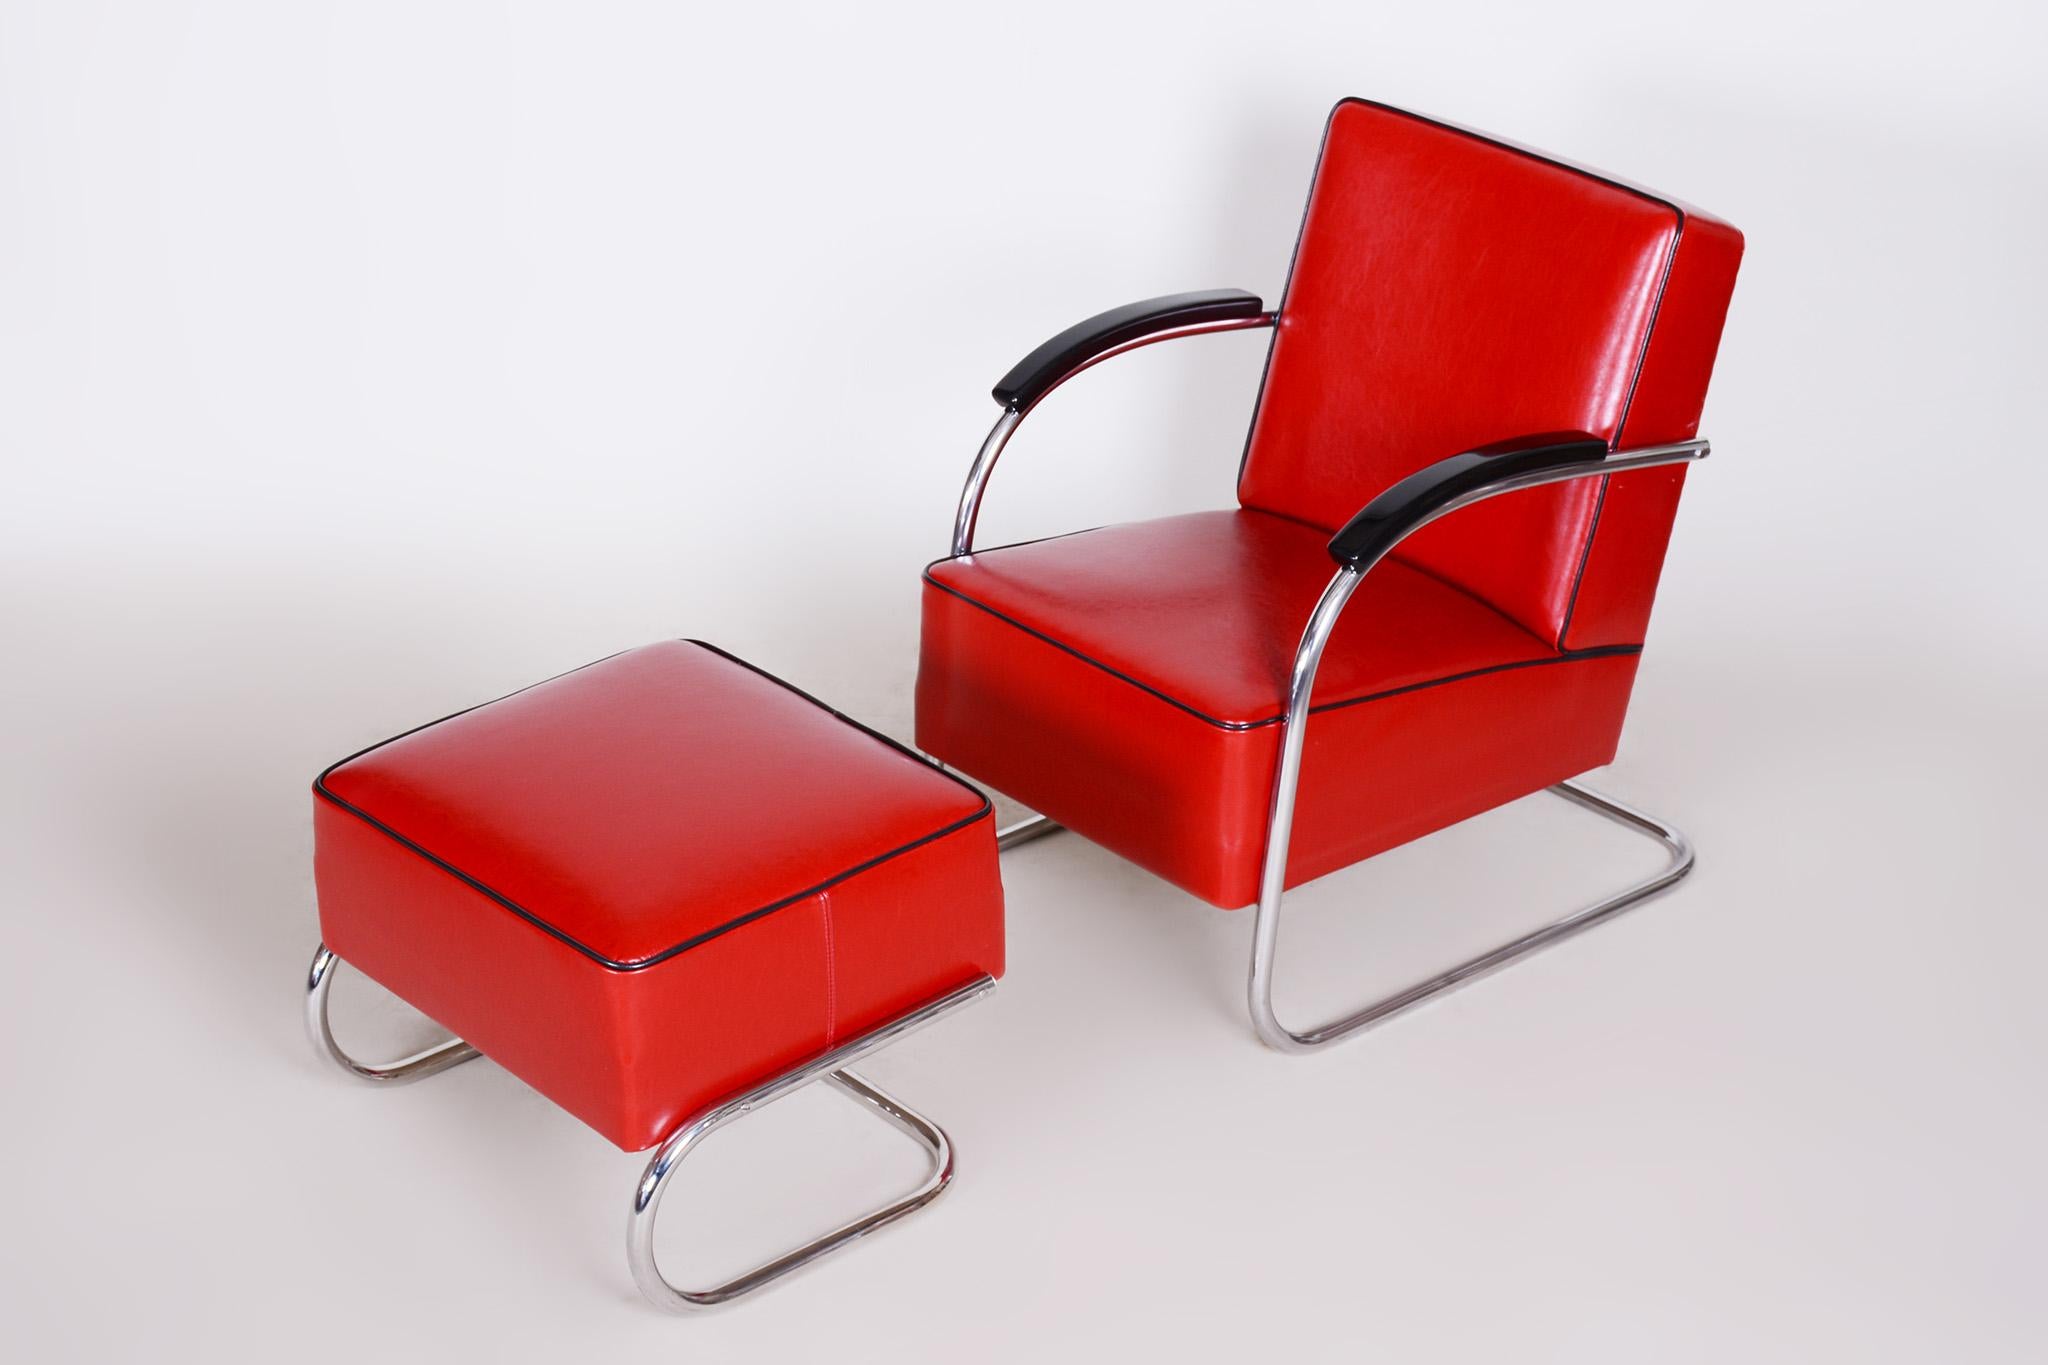 Mid-20th Century Red Mucke Melder Armchair and Ottoman, 1930s Czechia For Sale